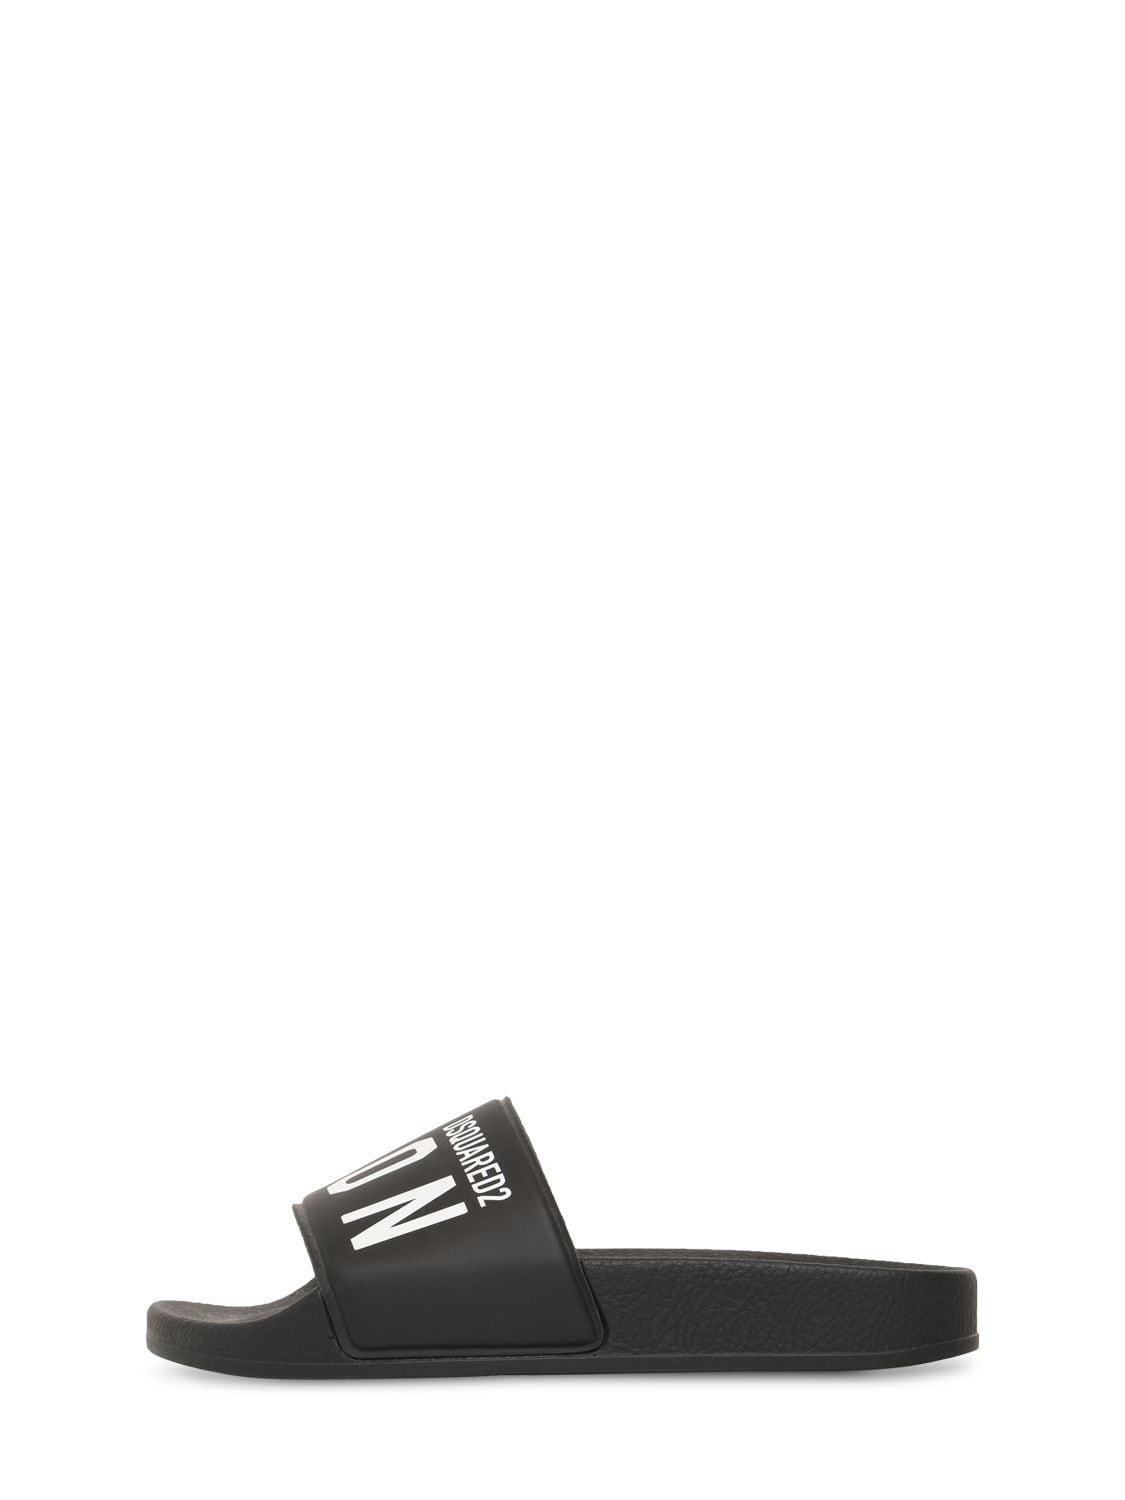 Icon Print Rubber Slide Sandals by DSQUARED2